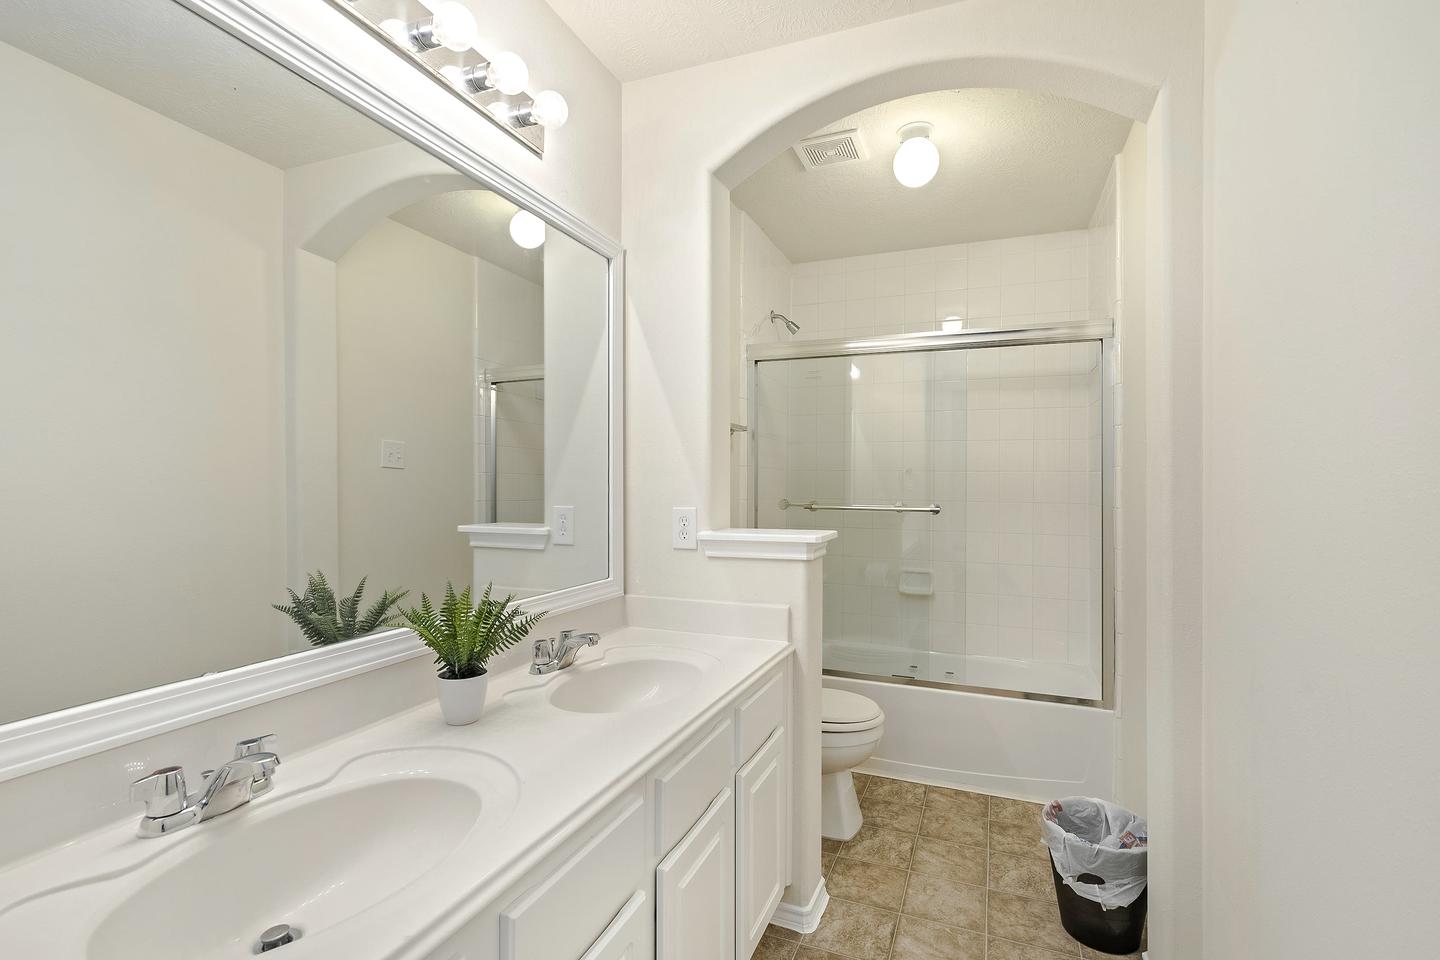 Double vanity is the standard for our royal tenants. This second bathroom has standup shower with tub